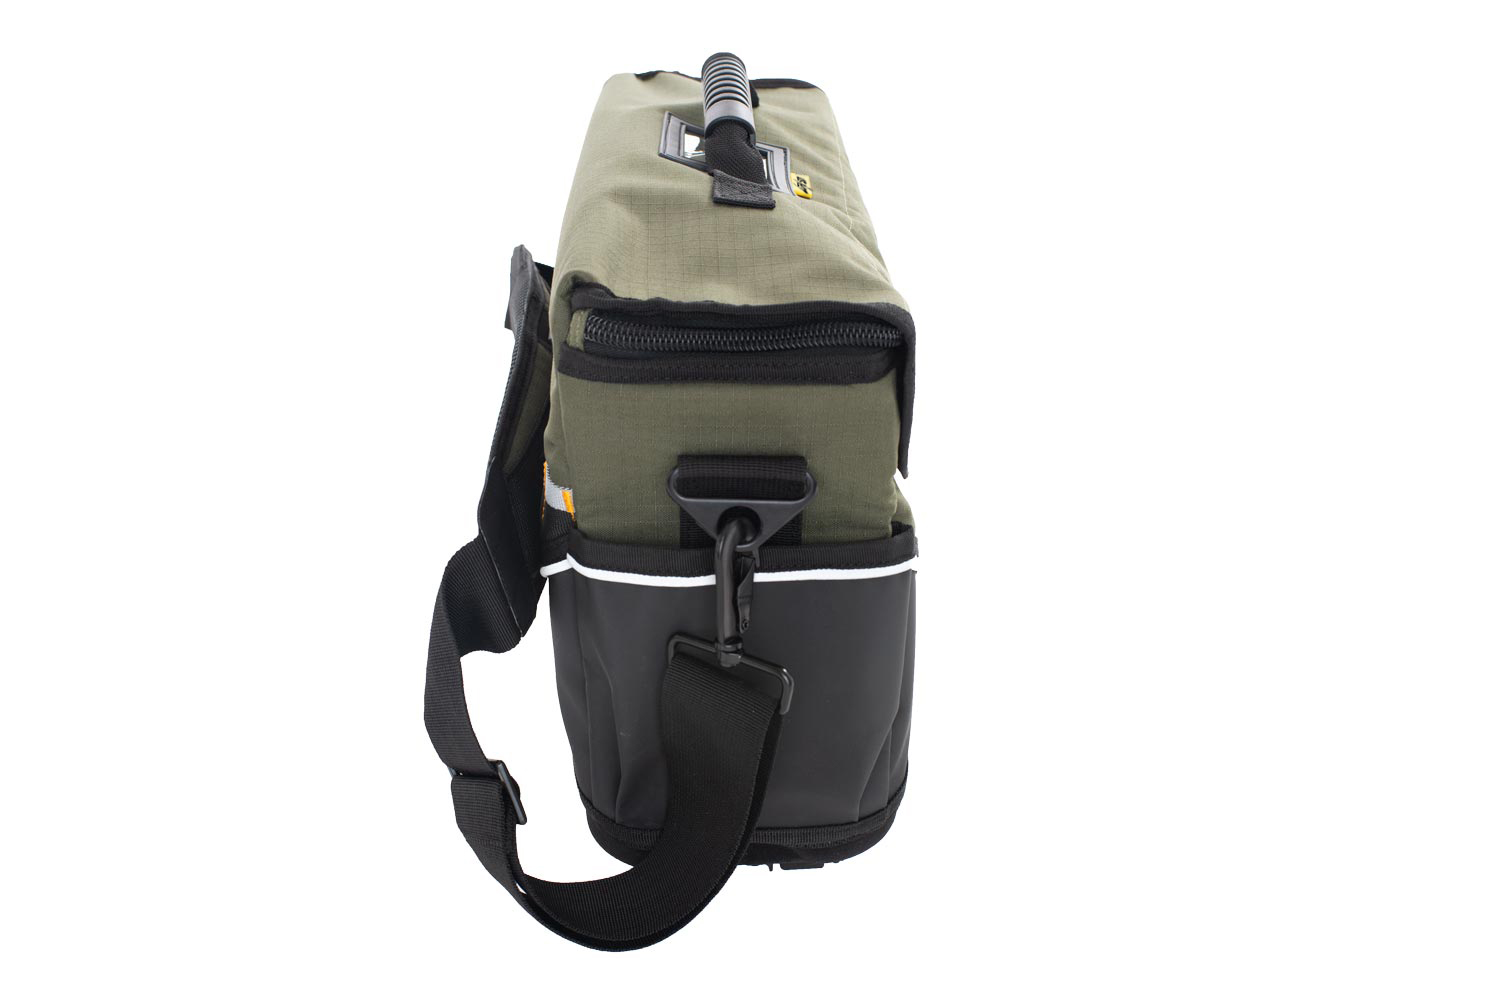 Lzdrason outdoor backpack companies company for camping